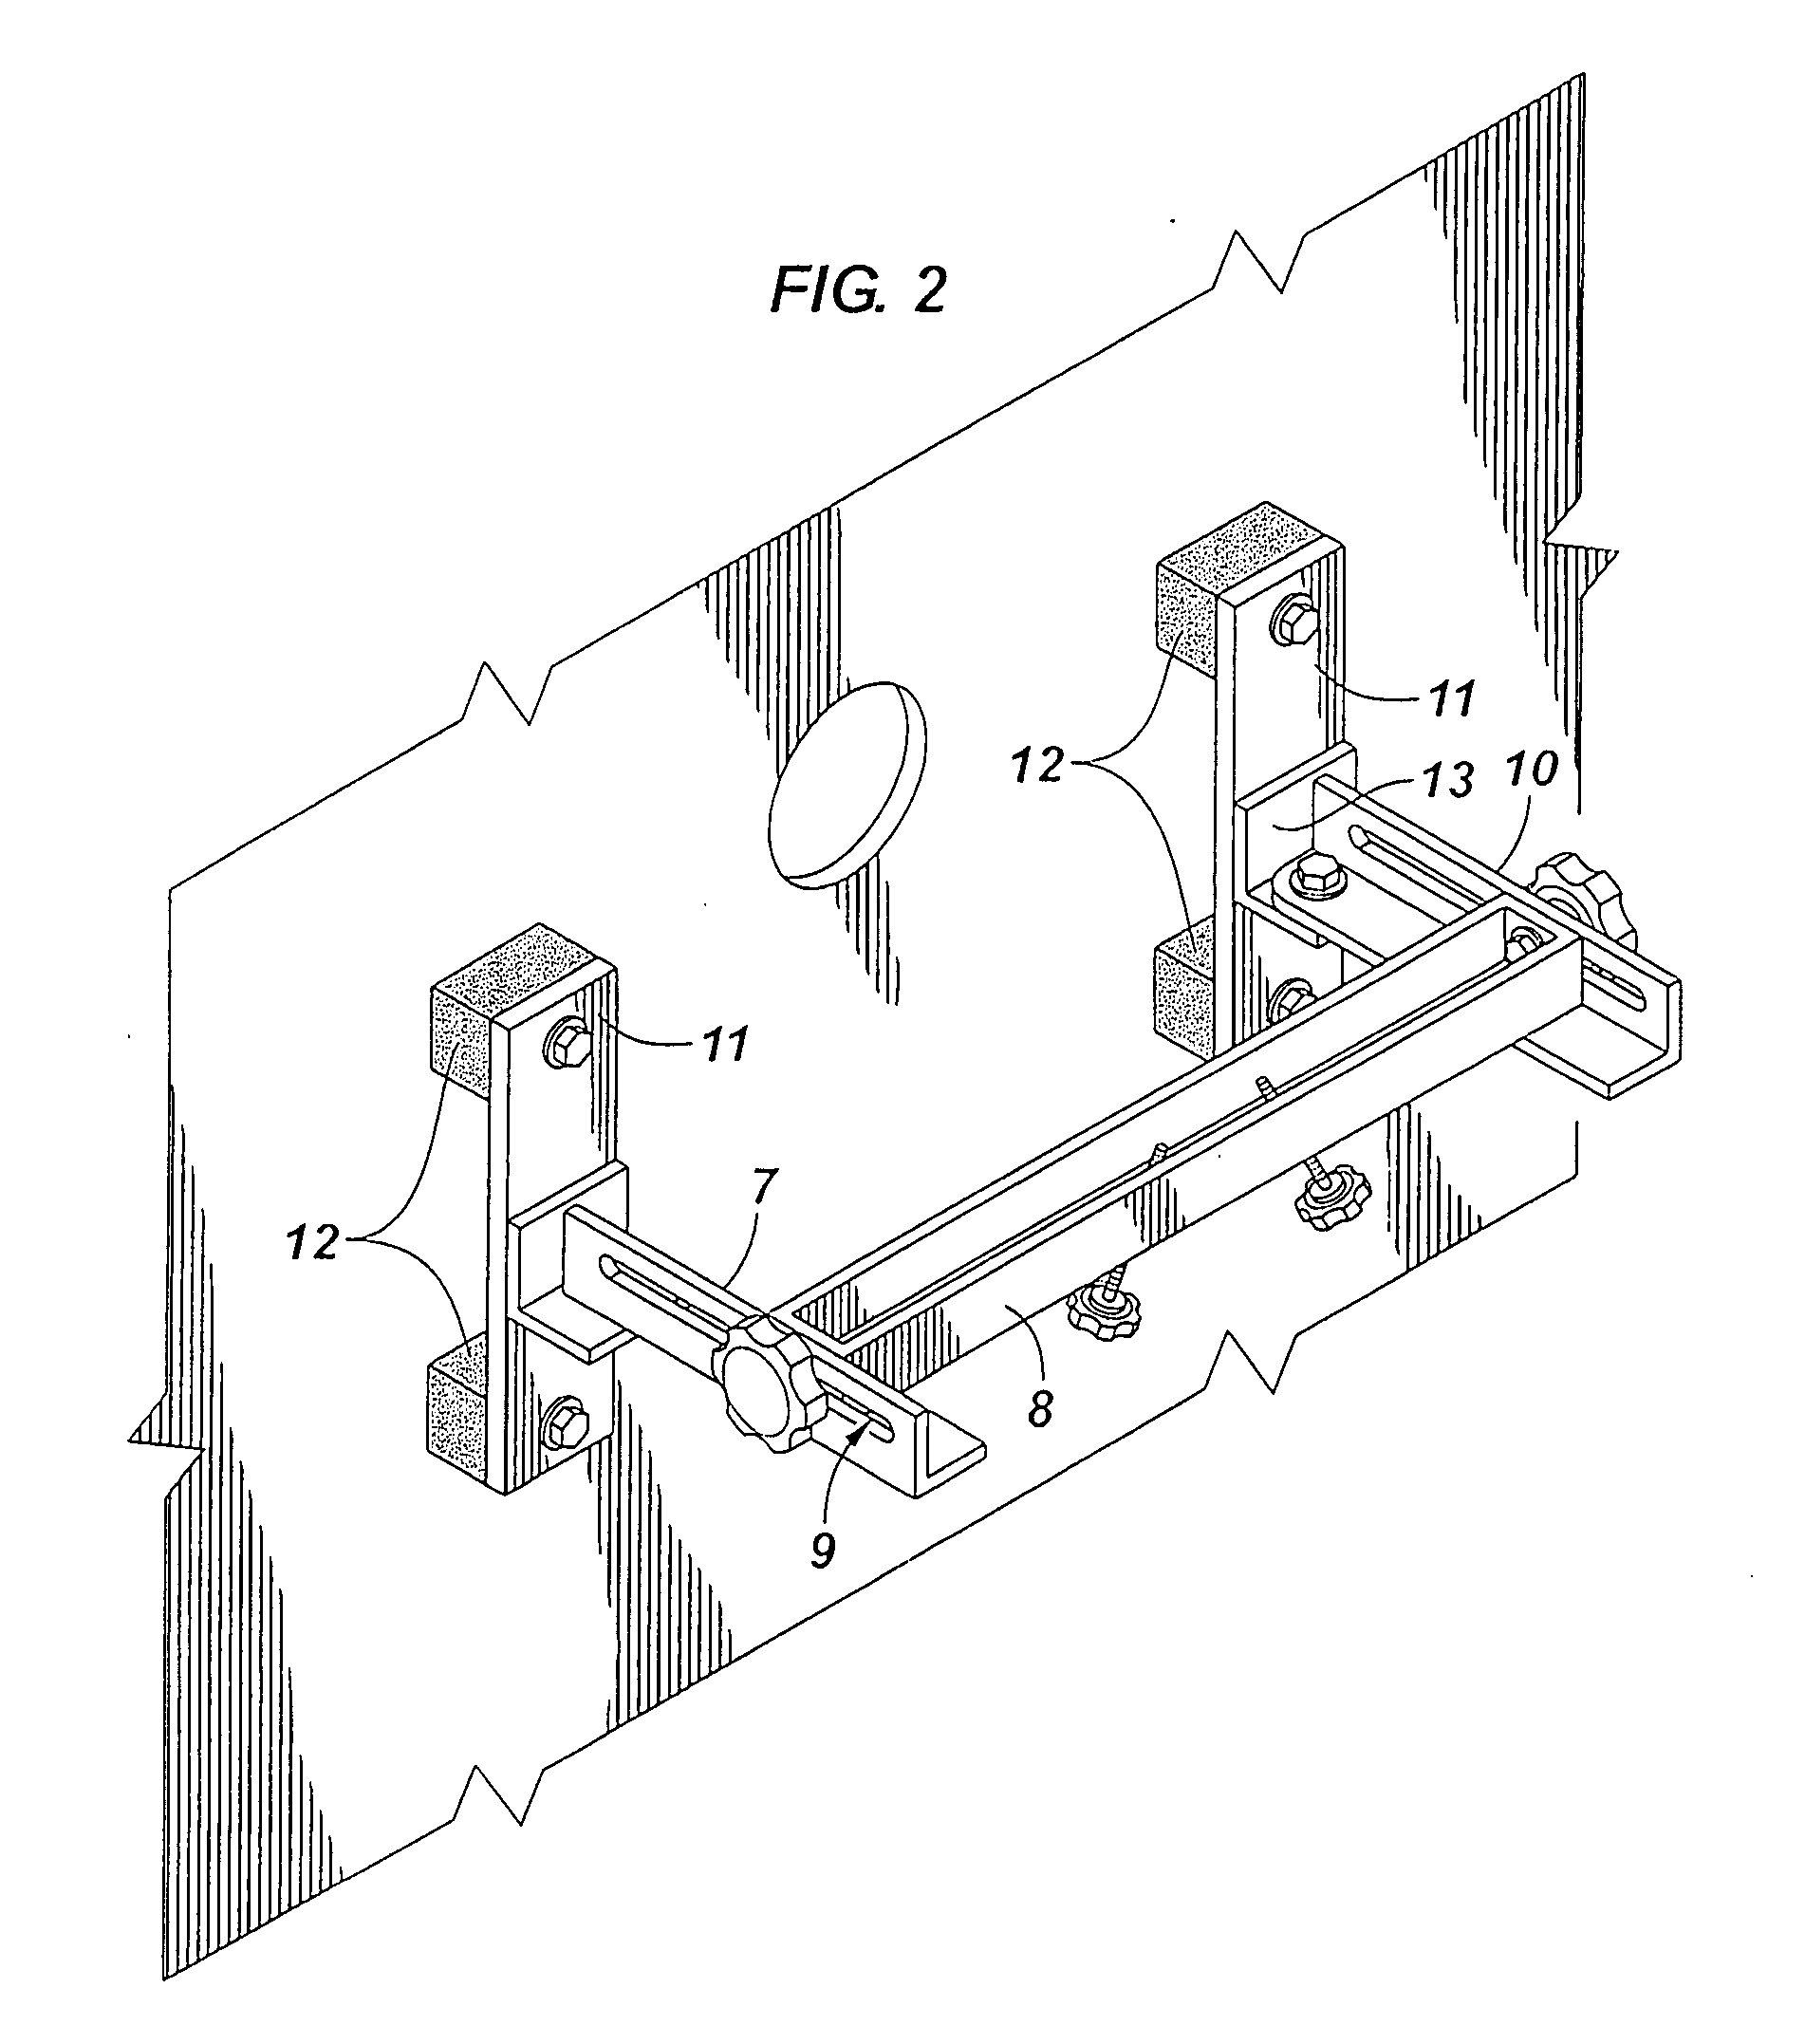 Pipe welding holding device and method for holding pipes with flanges in place during welding to vessel walls and other structures